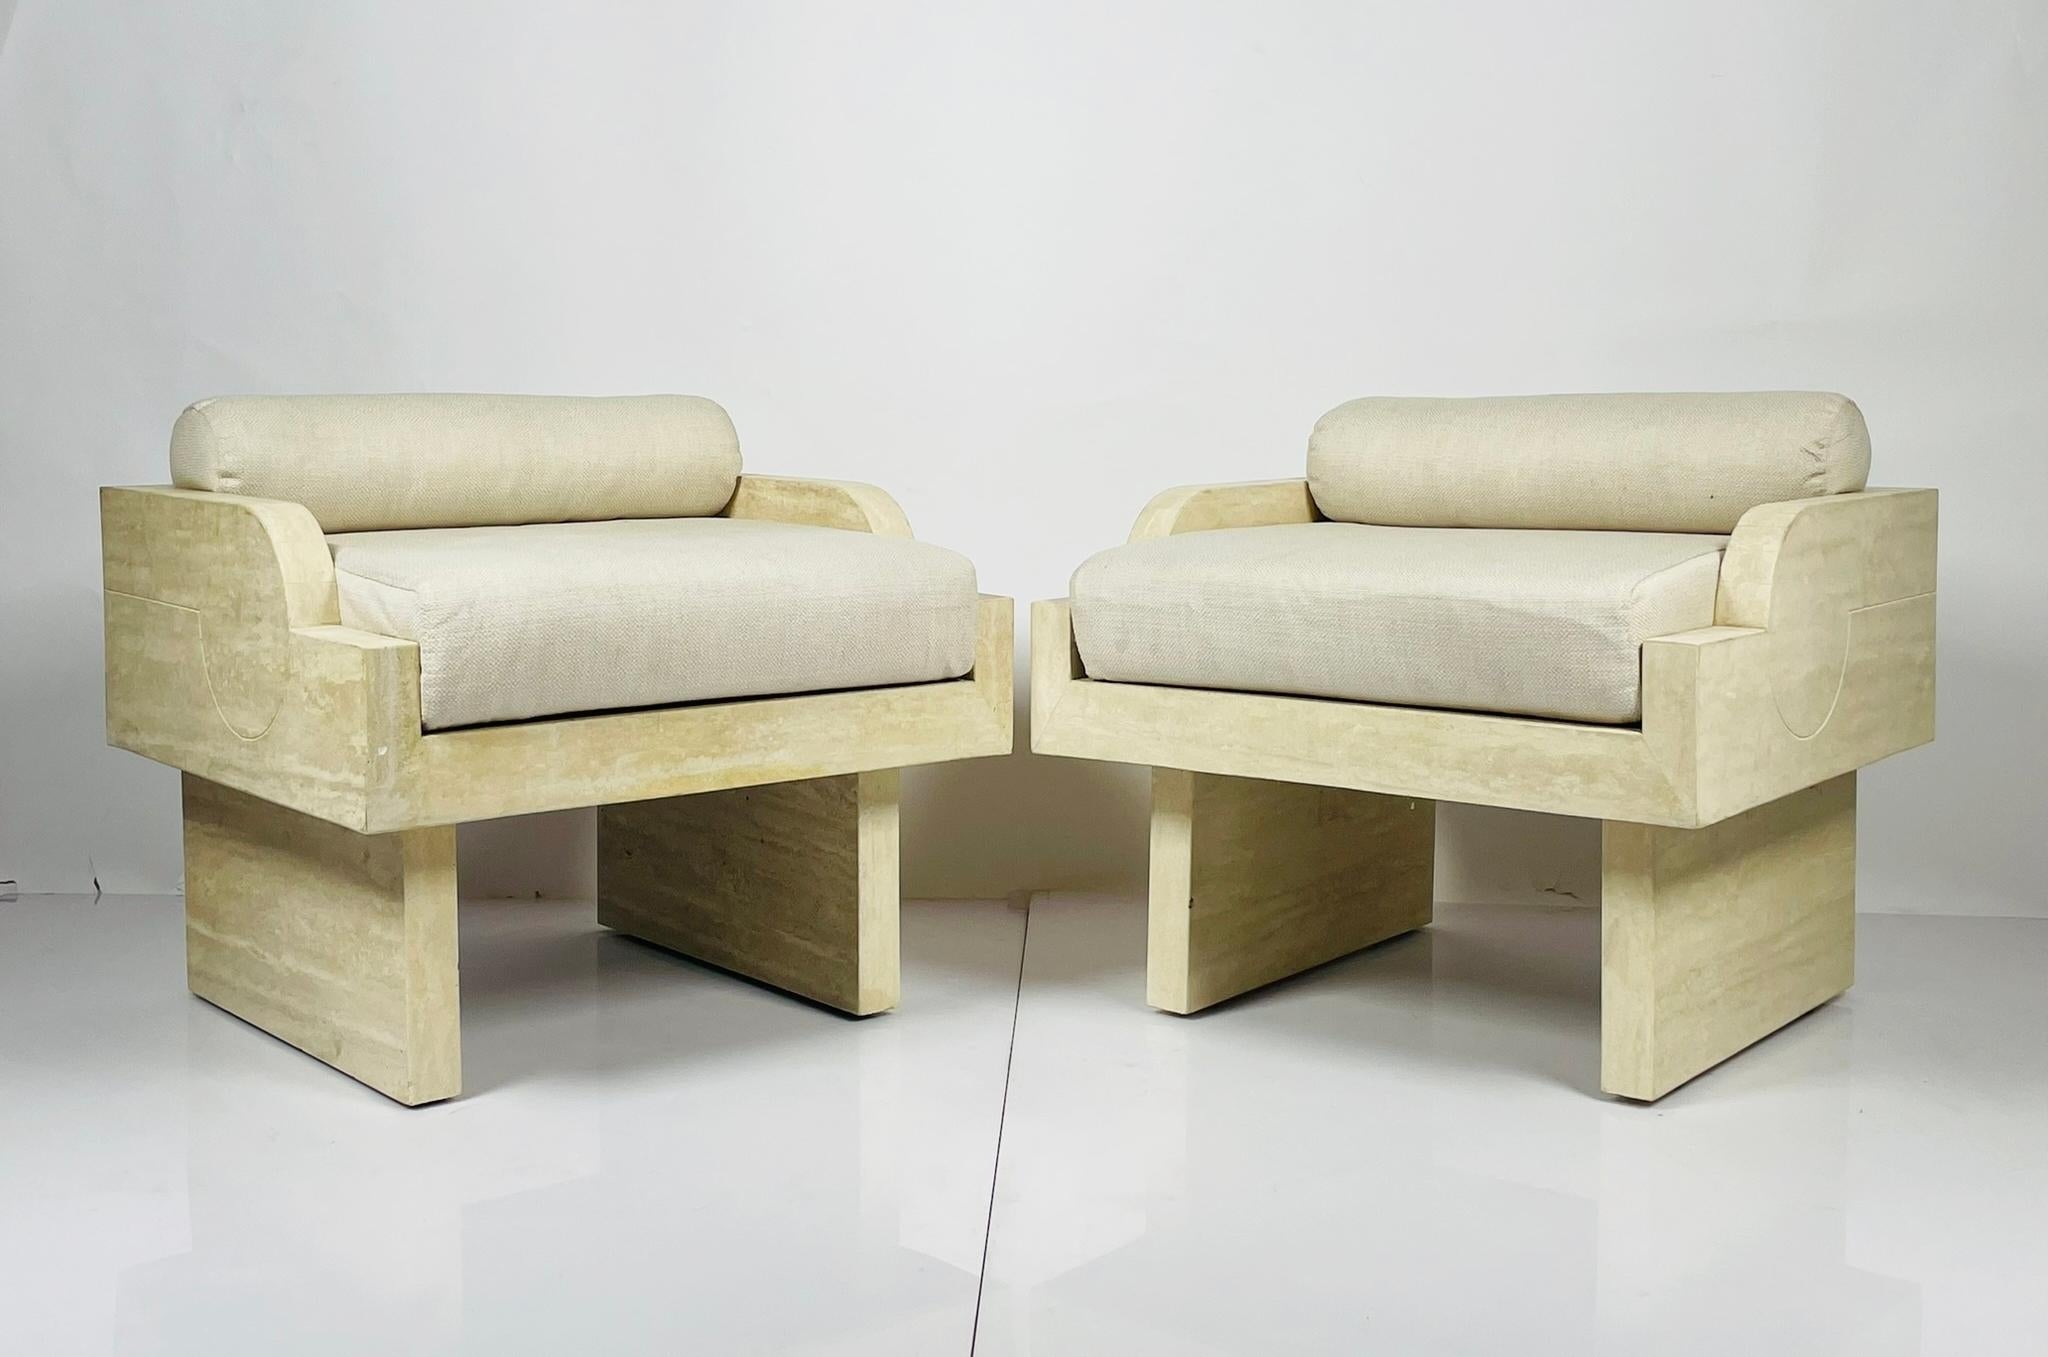 Stunning pair of armchairs designed and manufactured in France.
Made in solid travertine, beautiful architectural lines and upholstered in an off white fabric.

The chairs are attributed to Stéphane Parmentier's Gallipoli armchairs however these